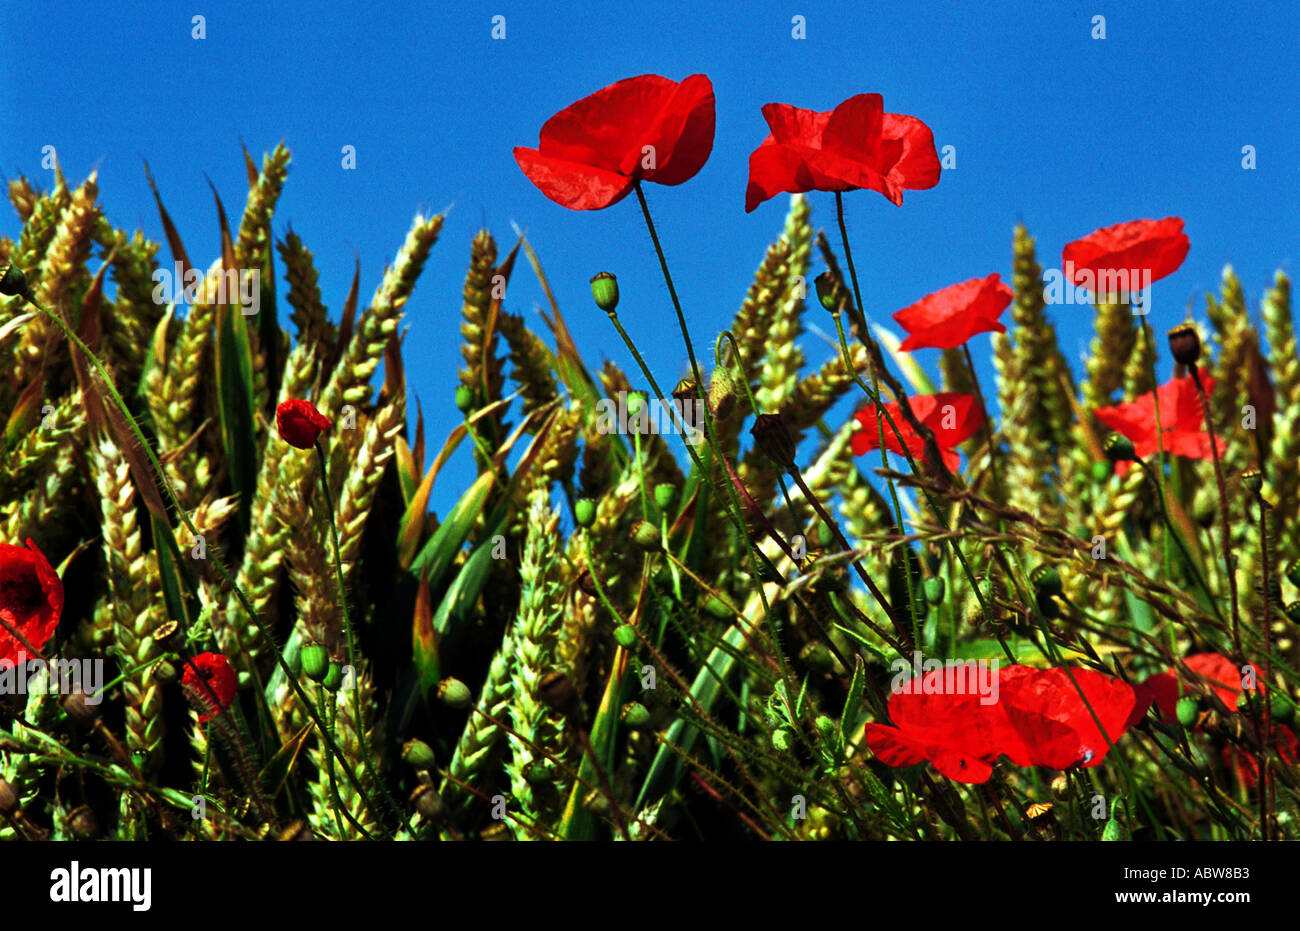 POPPIES CORNFIELD COUNTRYSIDE FIELDS RED BLUE WHEAT CORN AGRICULTURE Stock Photo